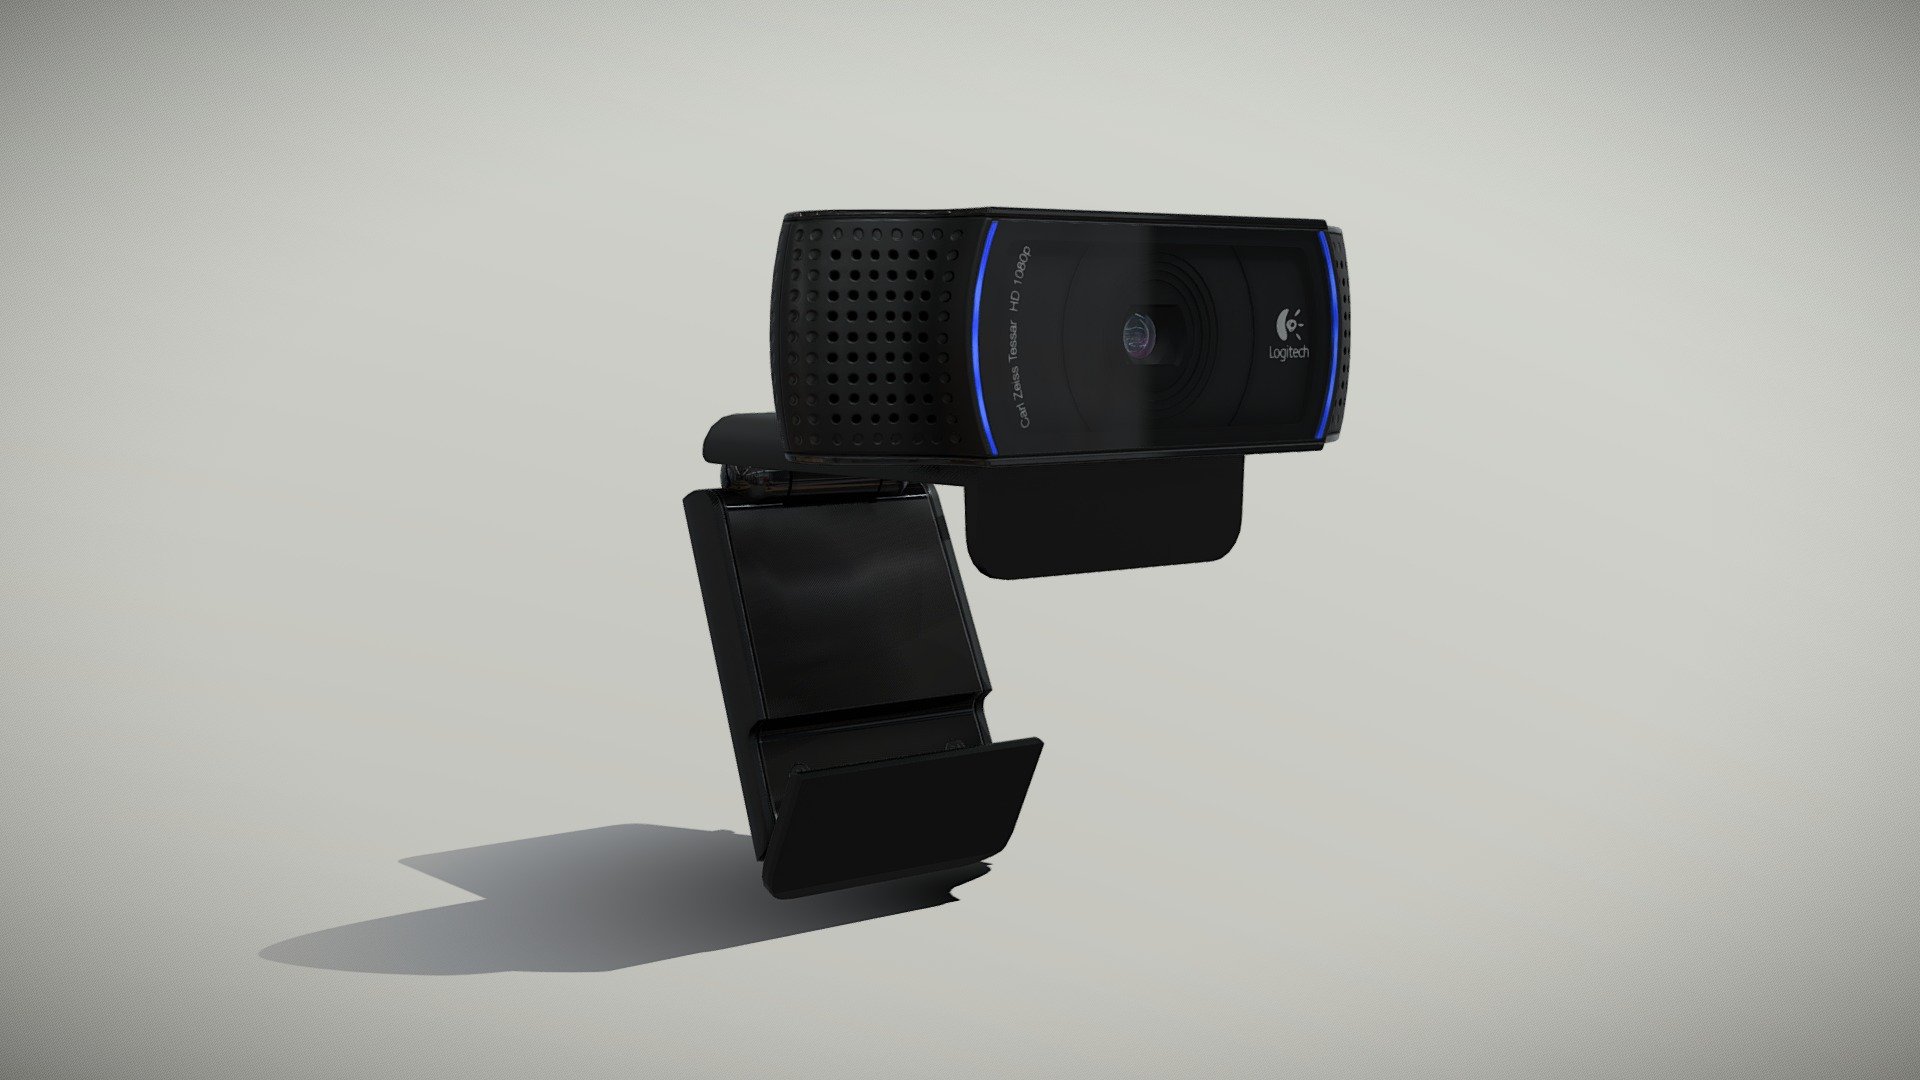 •   Let me present to you high-quality low-poly 3D model Logitech HD Pro Webcam C920. Modeling was made with ortho-photos of real webcam that is why all details of design are recreated most authentically.

•    This model consists of a few meshes, it is low-polygonal and it has three materials (Body, glass and glass of lens).

•   The total of the main textures is 6. Resolution of all textures is 4096 pixels square aspect ratio in .png format. Also there is original texture file .PSD format in separate archive.

•   Polygon count of the model is – 4127.

•   The model has correct dimensions in real-world scale. All parts grouped and named correctly.

•   To use the model in other 3D programs there are scenes saved in formats .fbx, .obj, .DAE, .max (2010 version).

Note: If you see some artifacts on the textures, it means compression works in the Viewer. We recommend setting HD quality for textures. But anyway, original textures have no artifacts 3d model